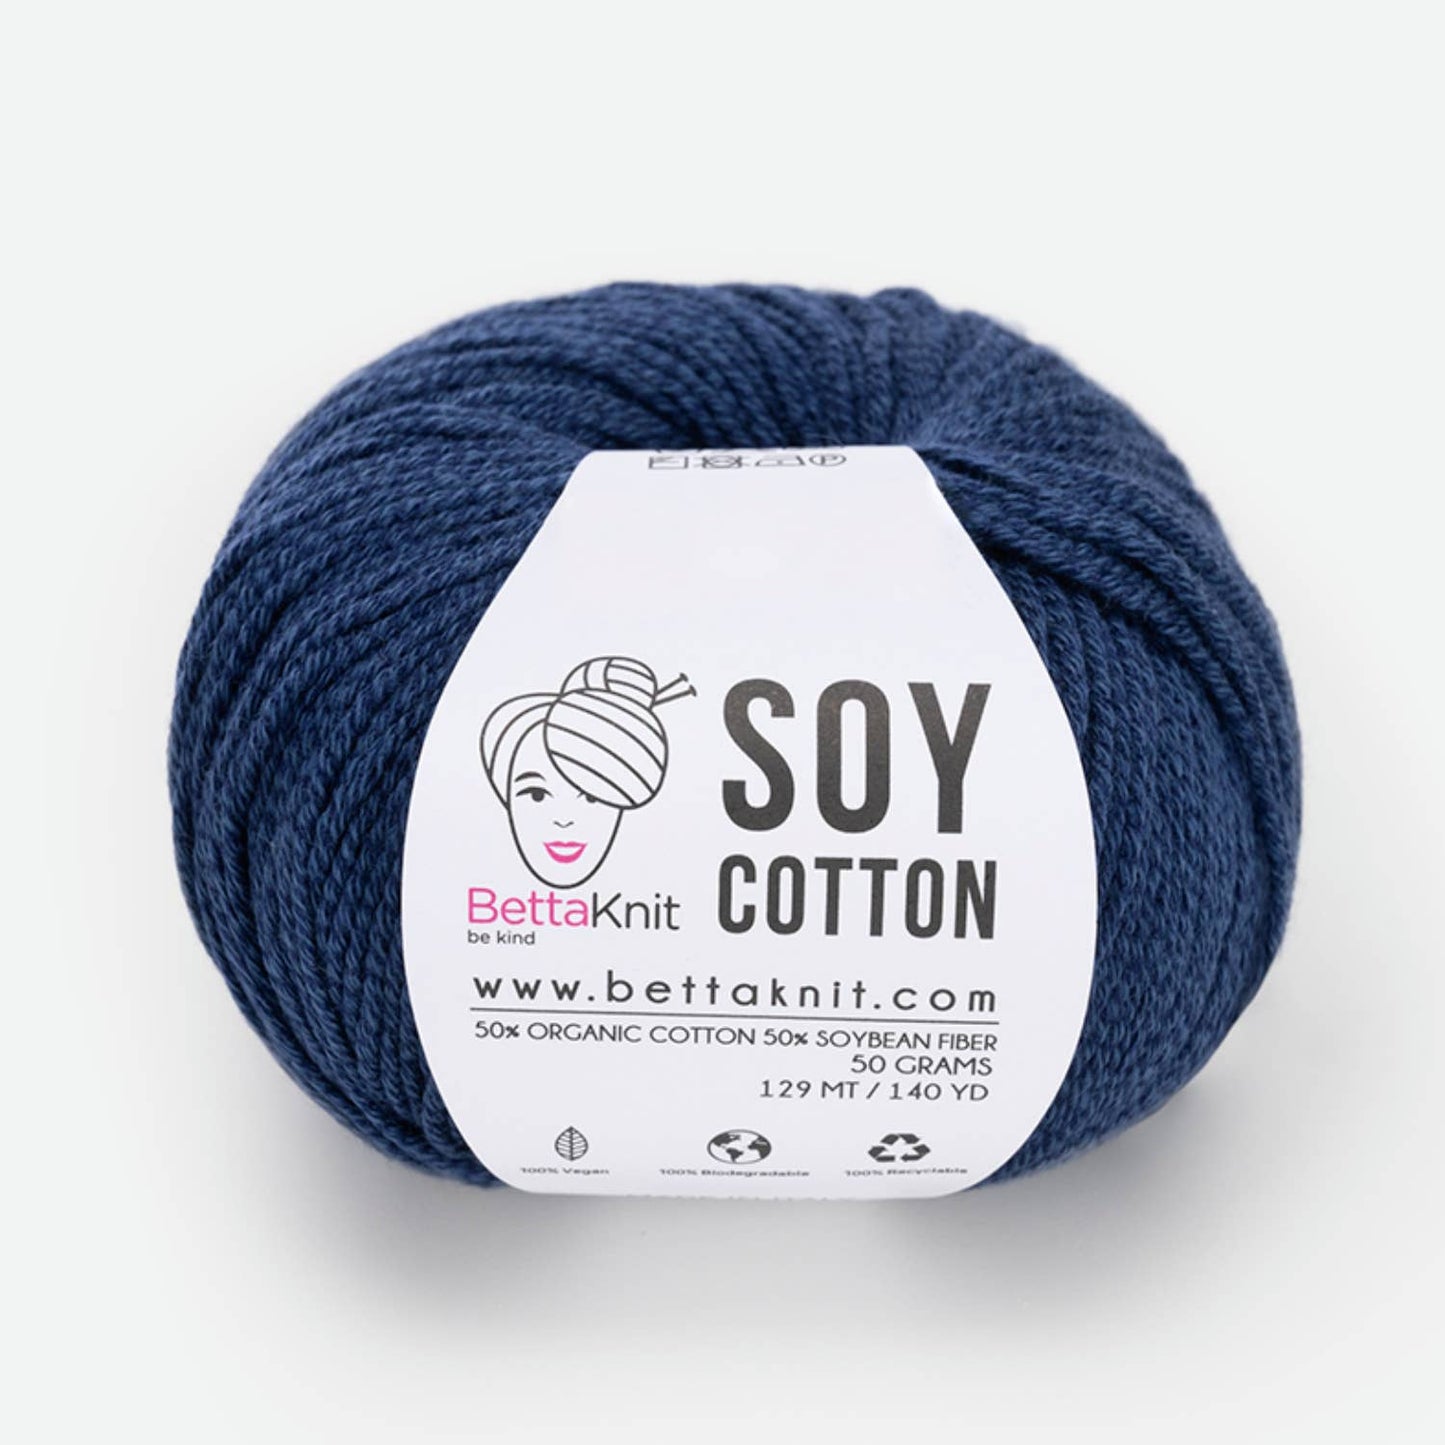 Soy Cotton, Cotton and soy Yarn